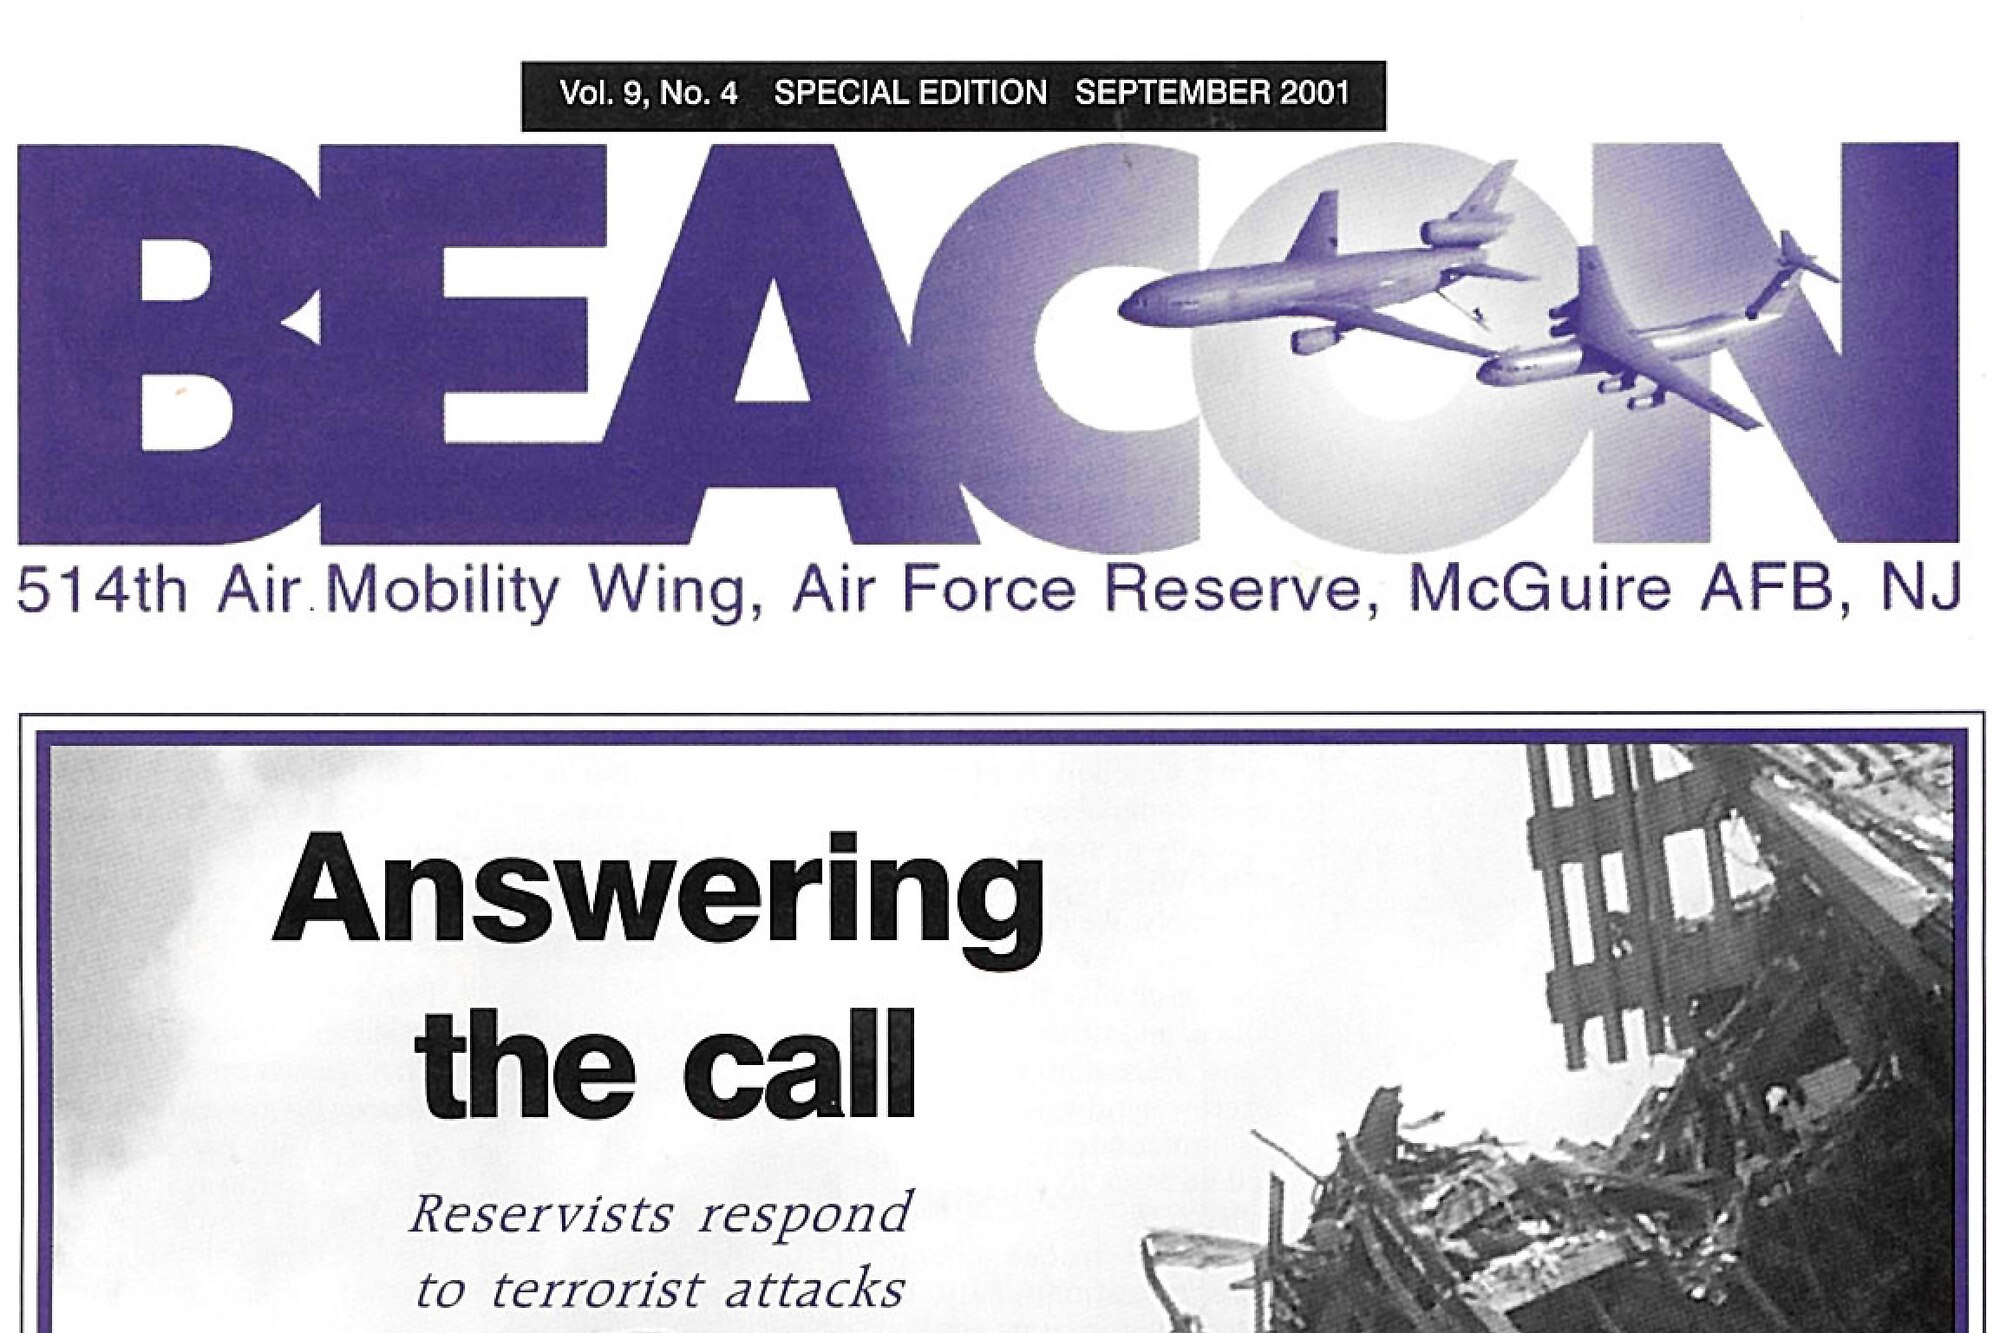 The September 2001 issue of Beacon covered the 514th Air Mobility Wing's experience surrounding the 9/11 terror attacks in New York City.